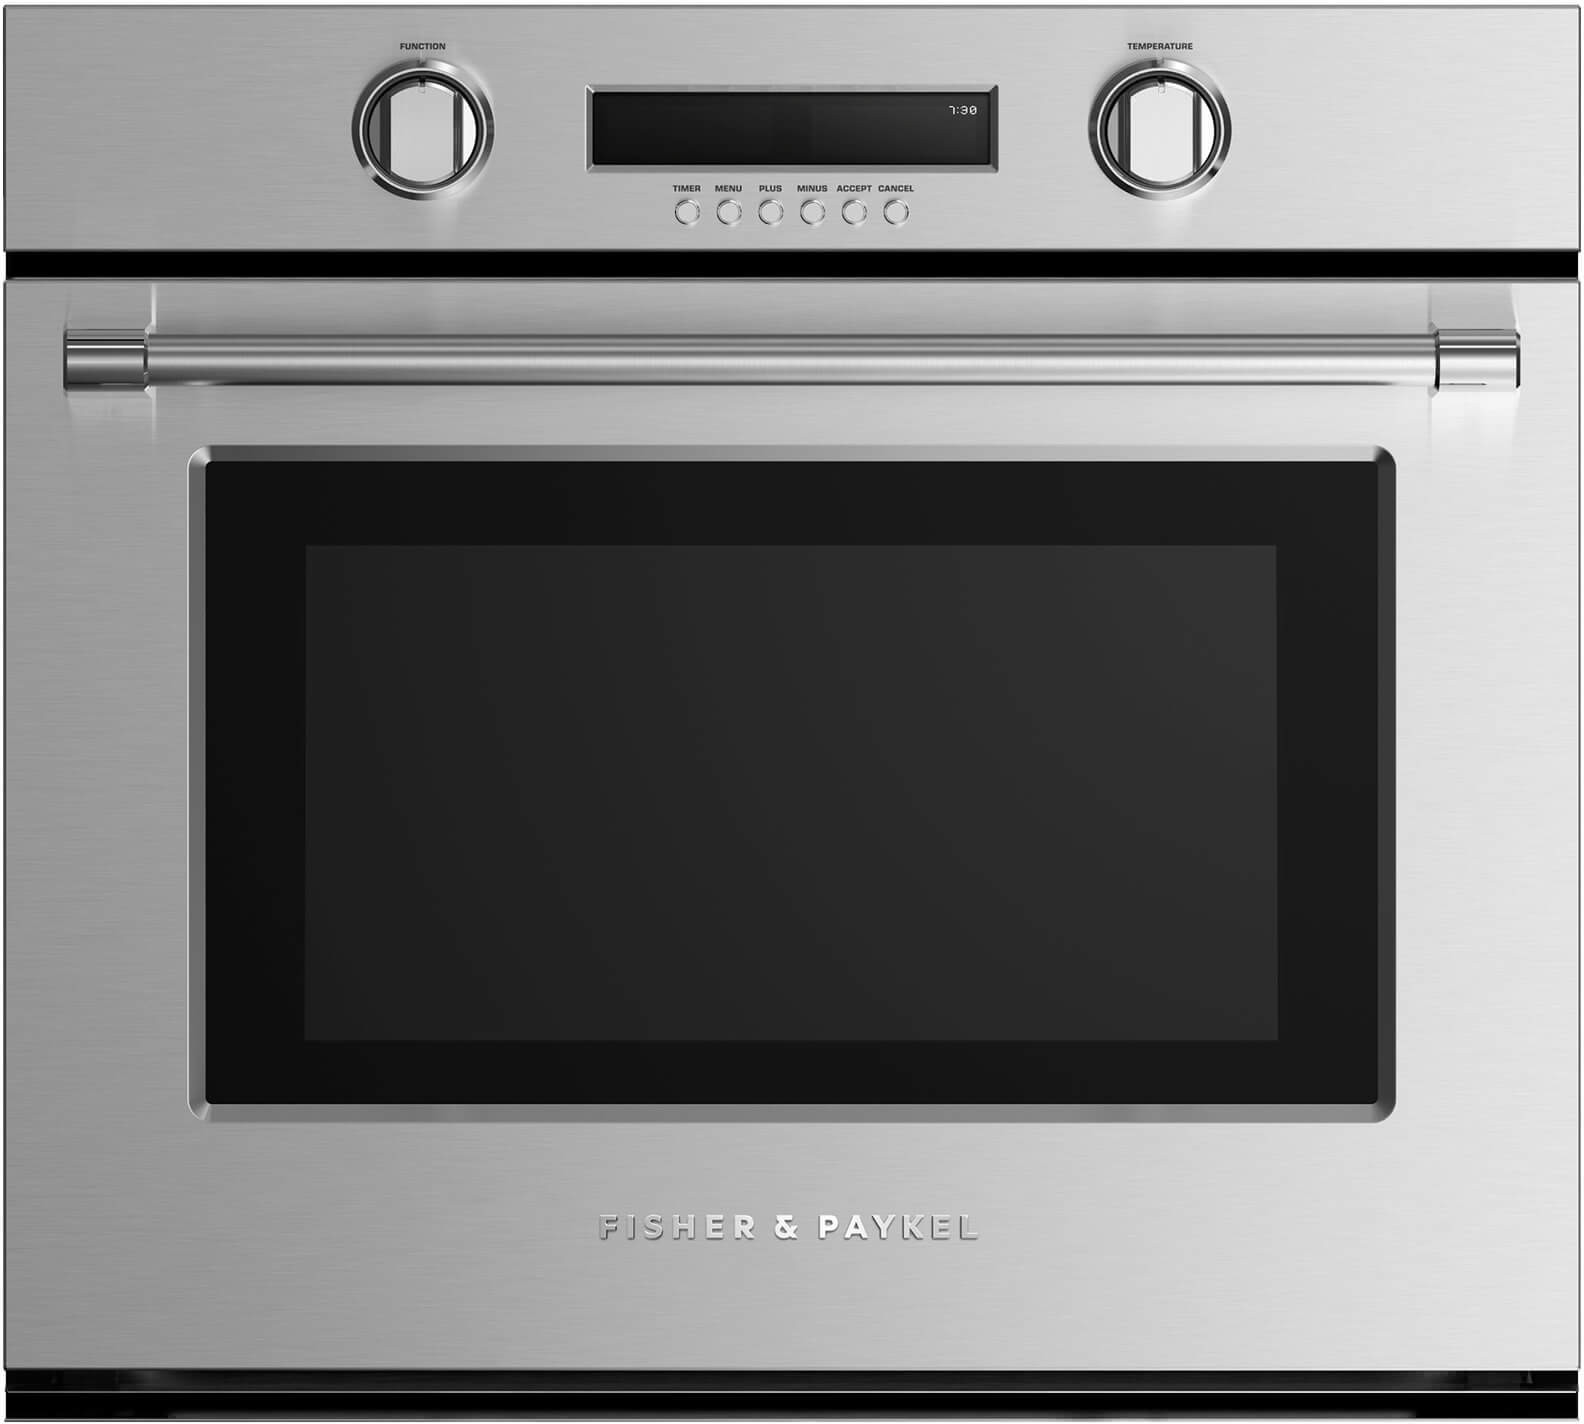 Fisher & Paykel Series 9 Professional 30"" Single Electric Wall Oven WOSV230N -  WOSV230 N